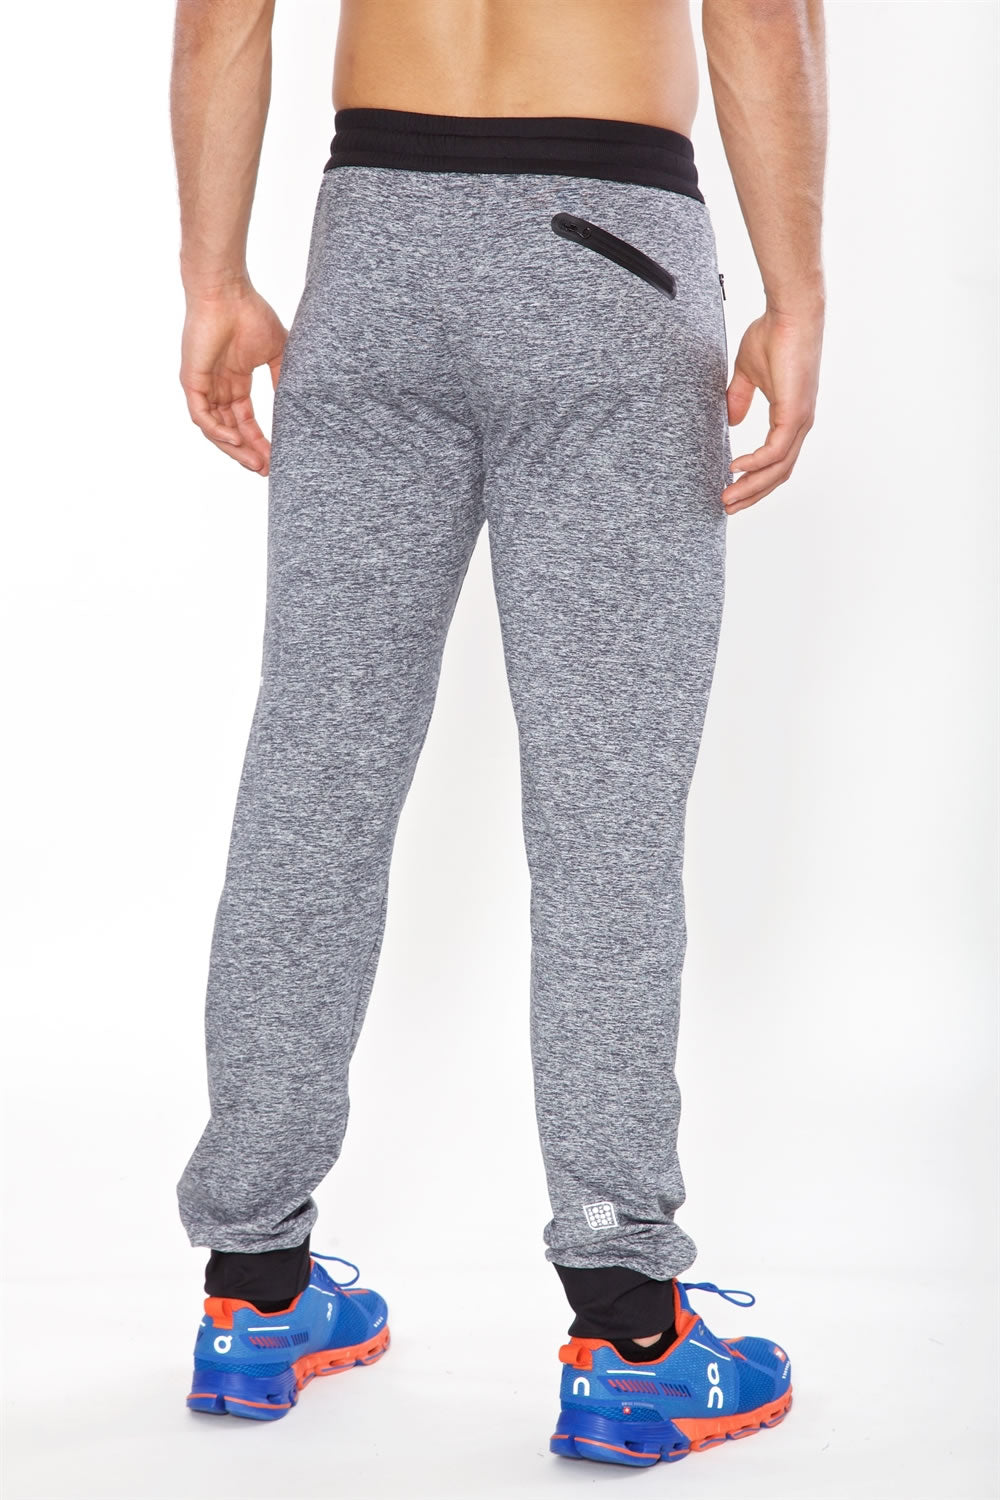 The No Bother Pant (Men's)